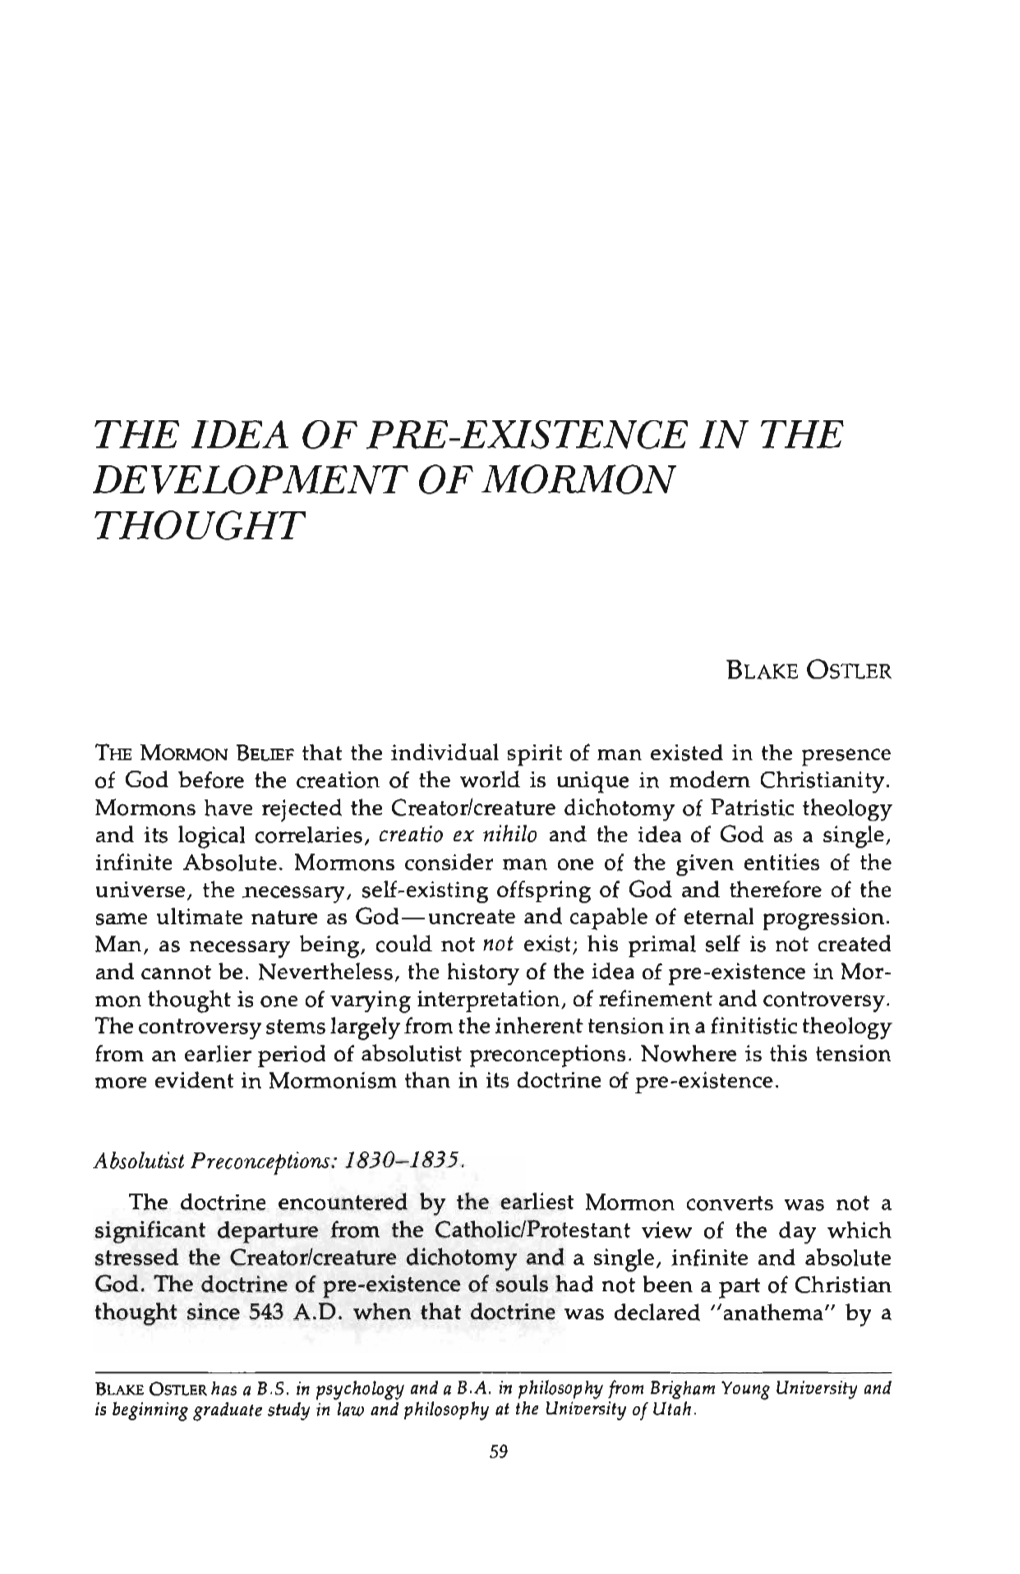 The Idea of Pre-Existence in the Development of Mormon Thought